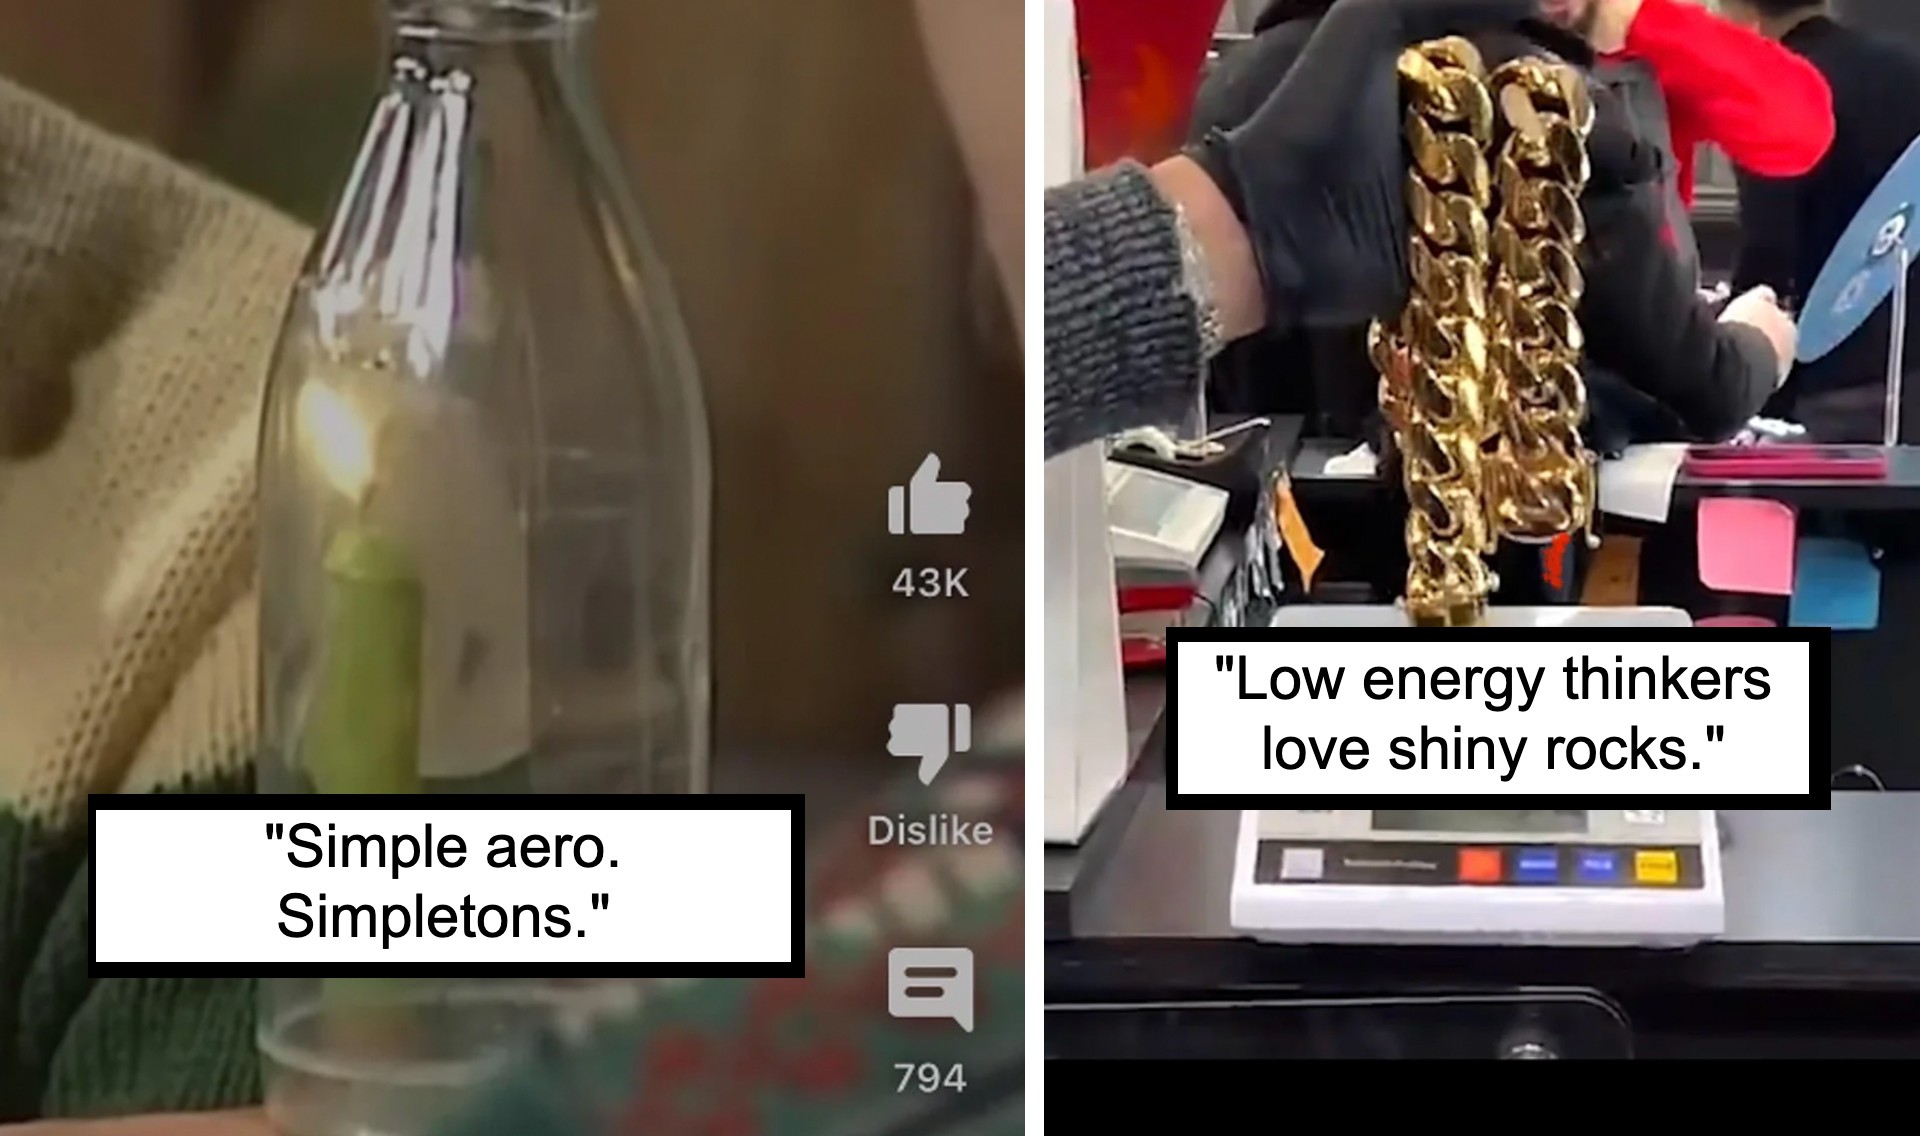 A split-screen image with the left side showing a close-up of a person holding a glass bottle with a green object inside, captioned "Simple aero. Simpletons." The right side shows a gloved hand holding a gold chain over a scale, captioned "Low energy thinkers love shiny rocks." Icons for likes, dislikes, and views are visible.